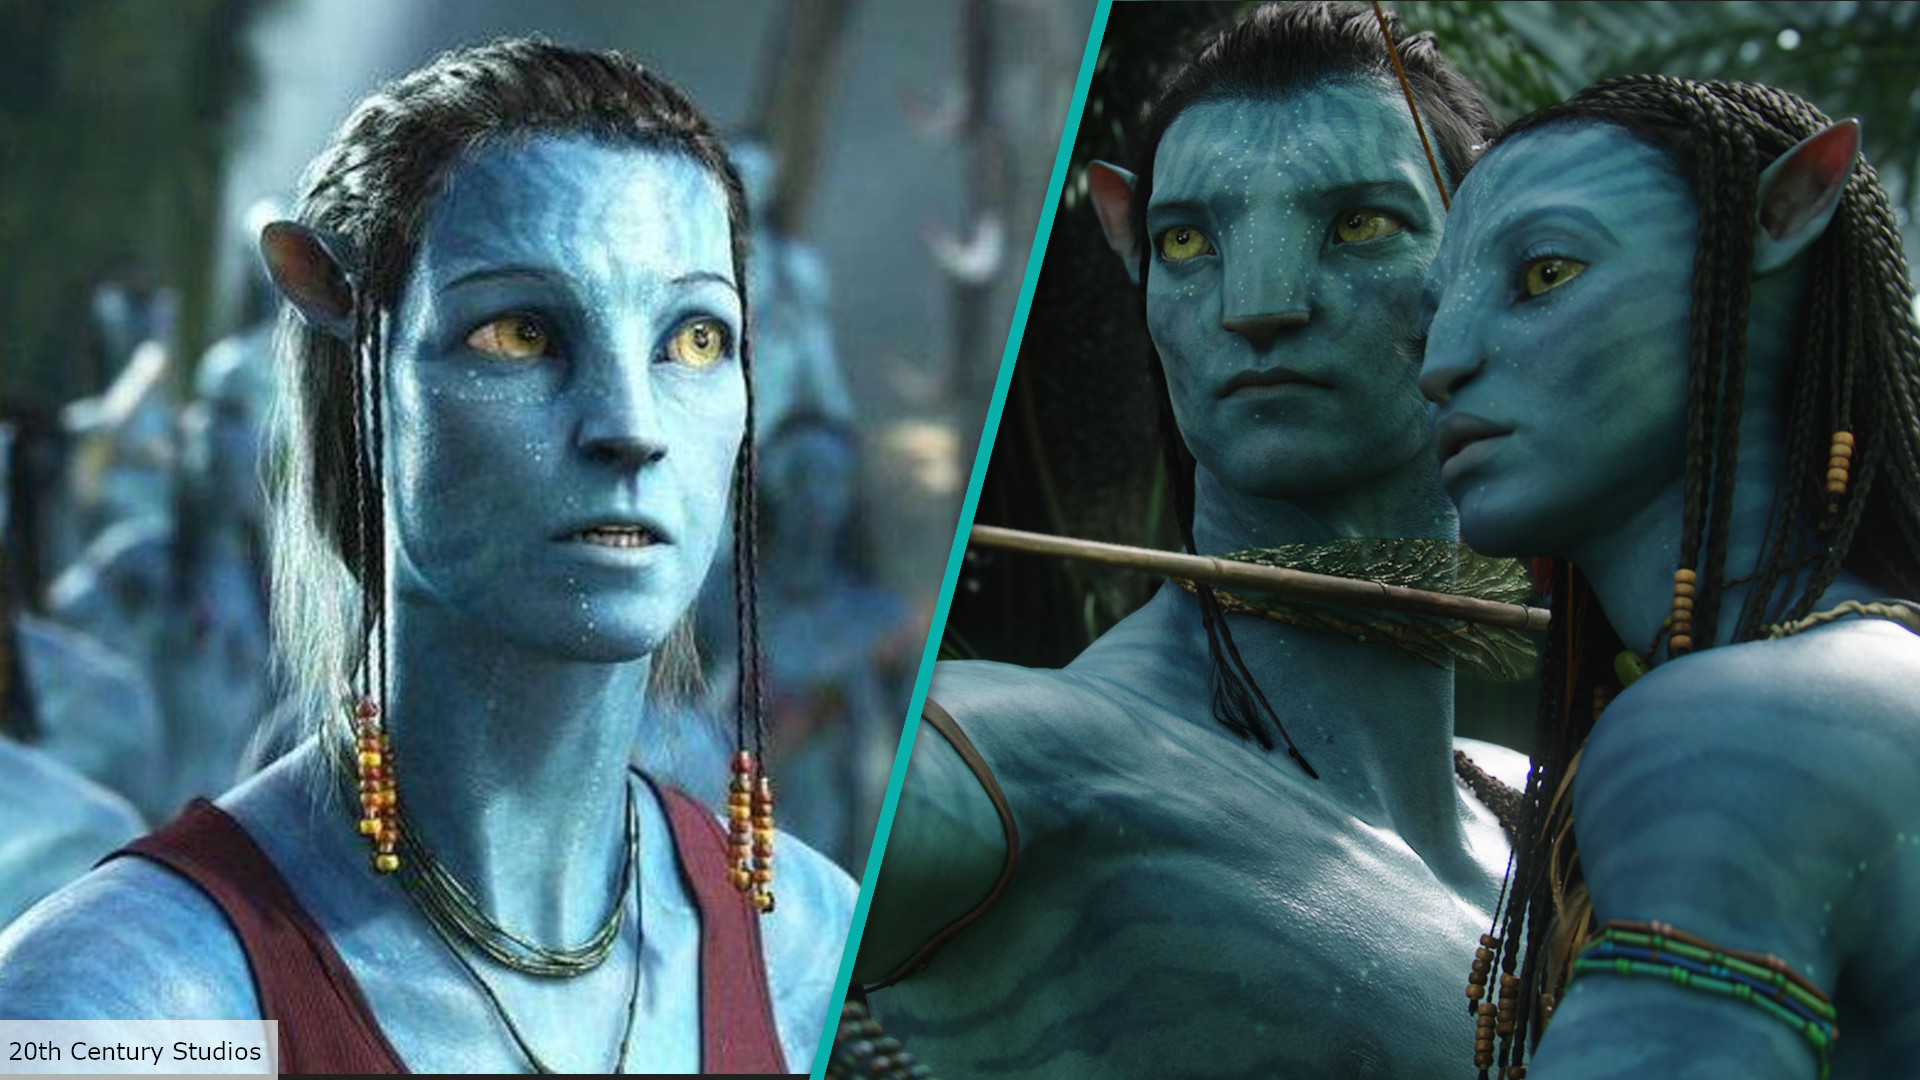 Avatar 2 is coming this year and will “blow people away”